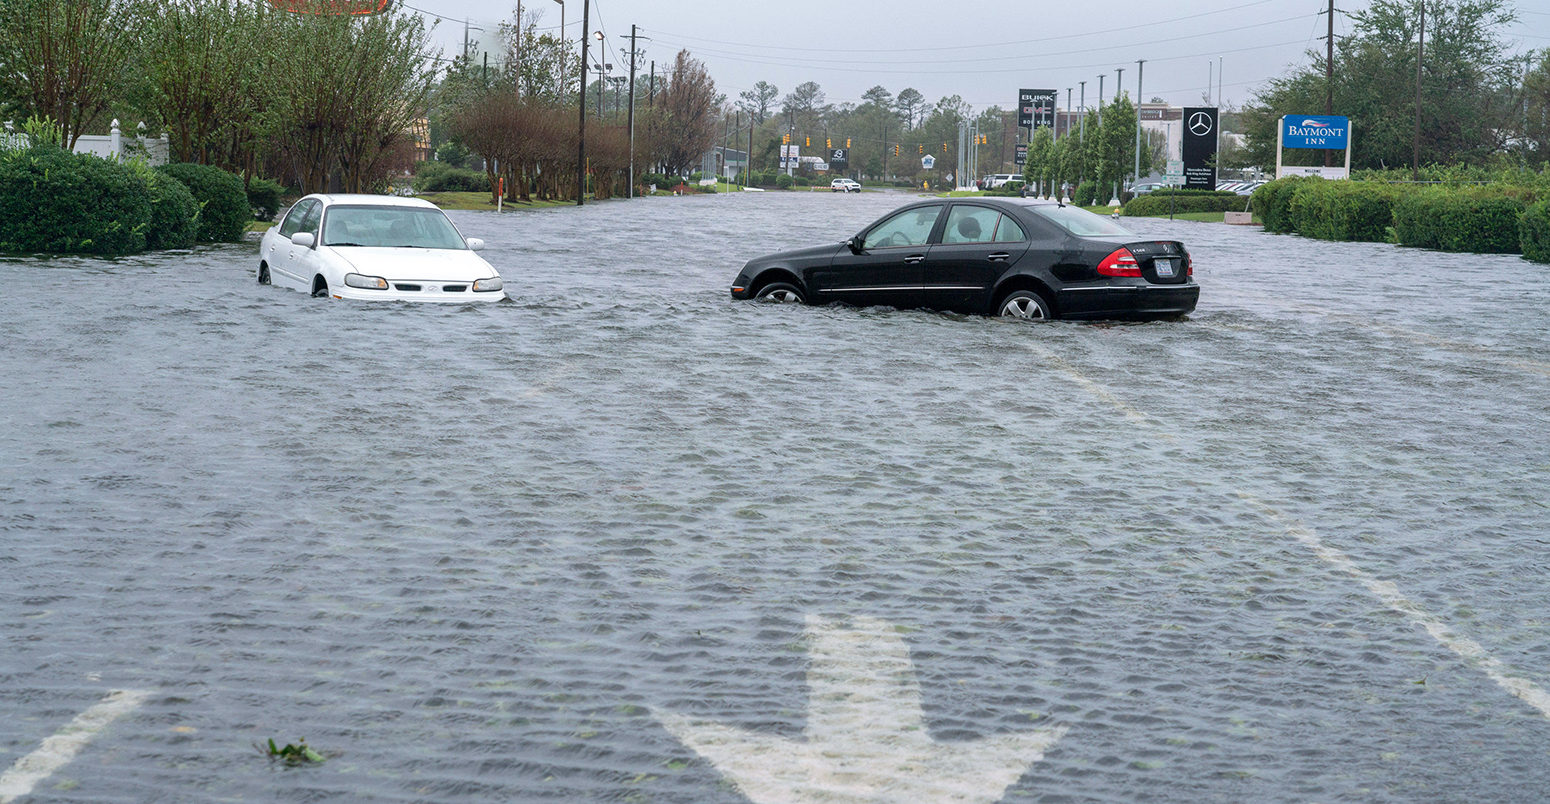 PKTMFJ Wilmington, United States. 15th Sep, 2018. Cars sit abandoned on a street during Hurricane, now tropical storm Florence September 15, 2018 in Wilmington, North Carolina. Tropical storm Florence is expected to drop more rain over the next few days and cause more flooding along North and South Carolina. Some rivers are expected to crest on Monday. Credit: Ken Cedeno/UPI Photo/Newscom/Alamy Live News